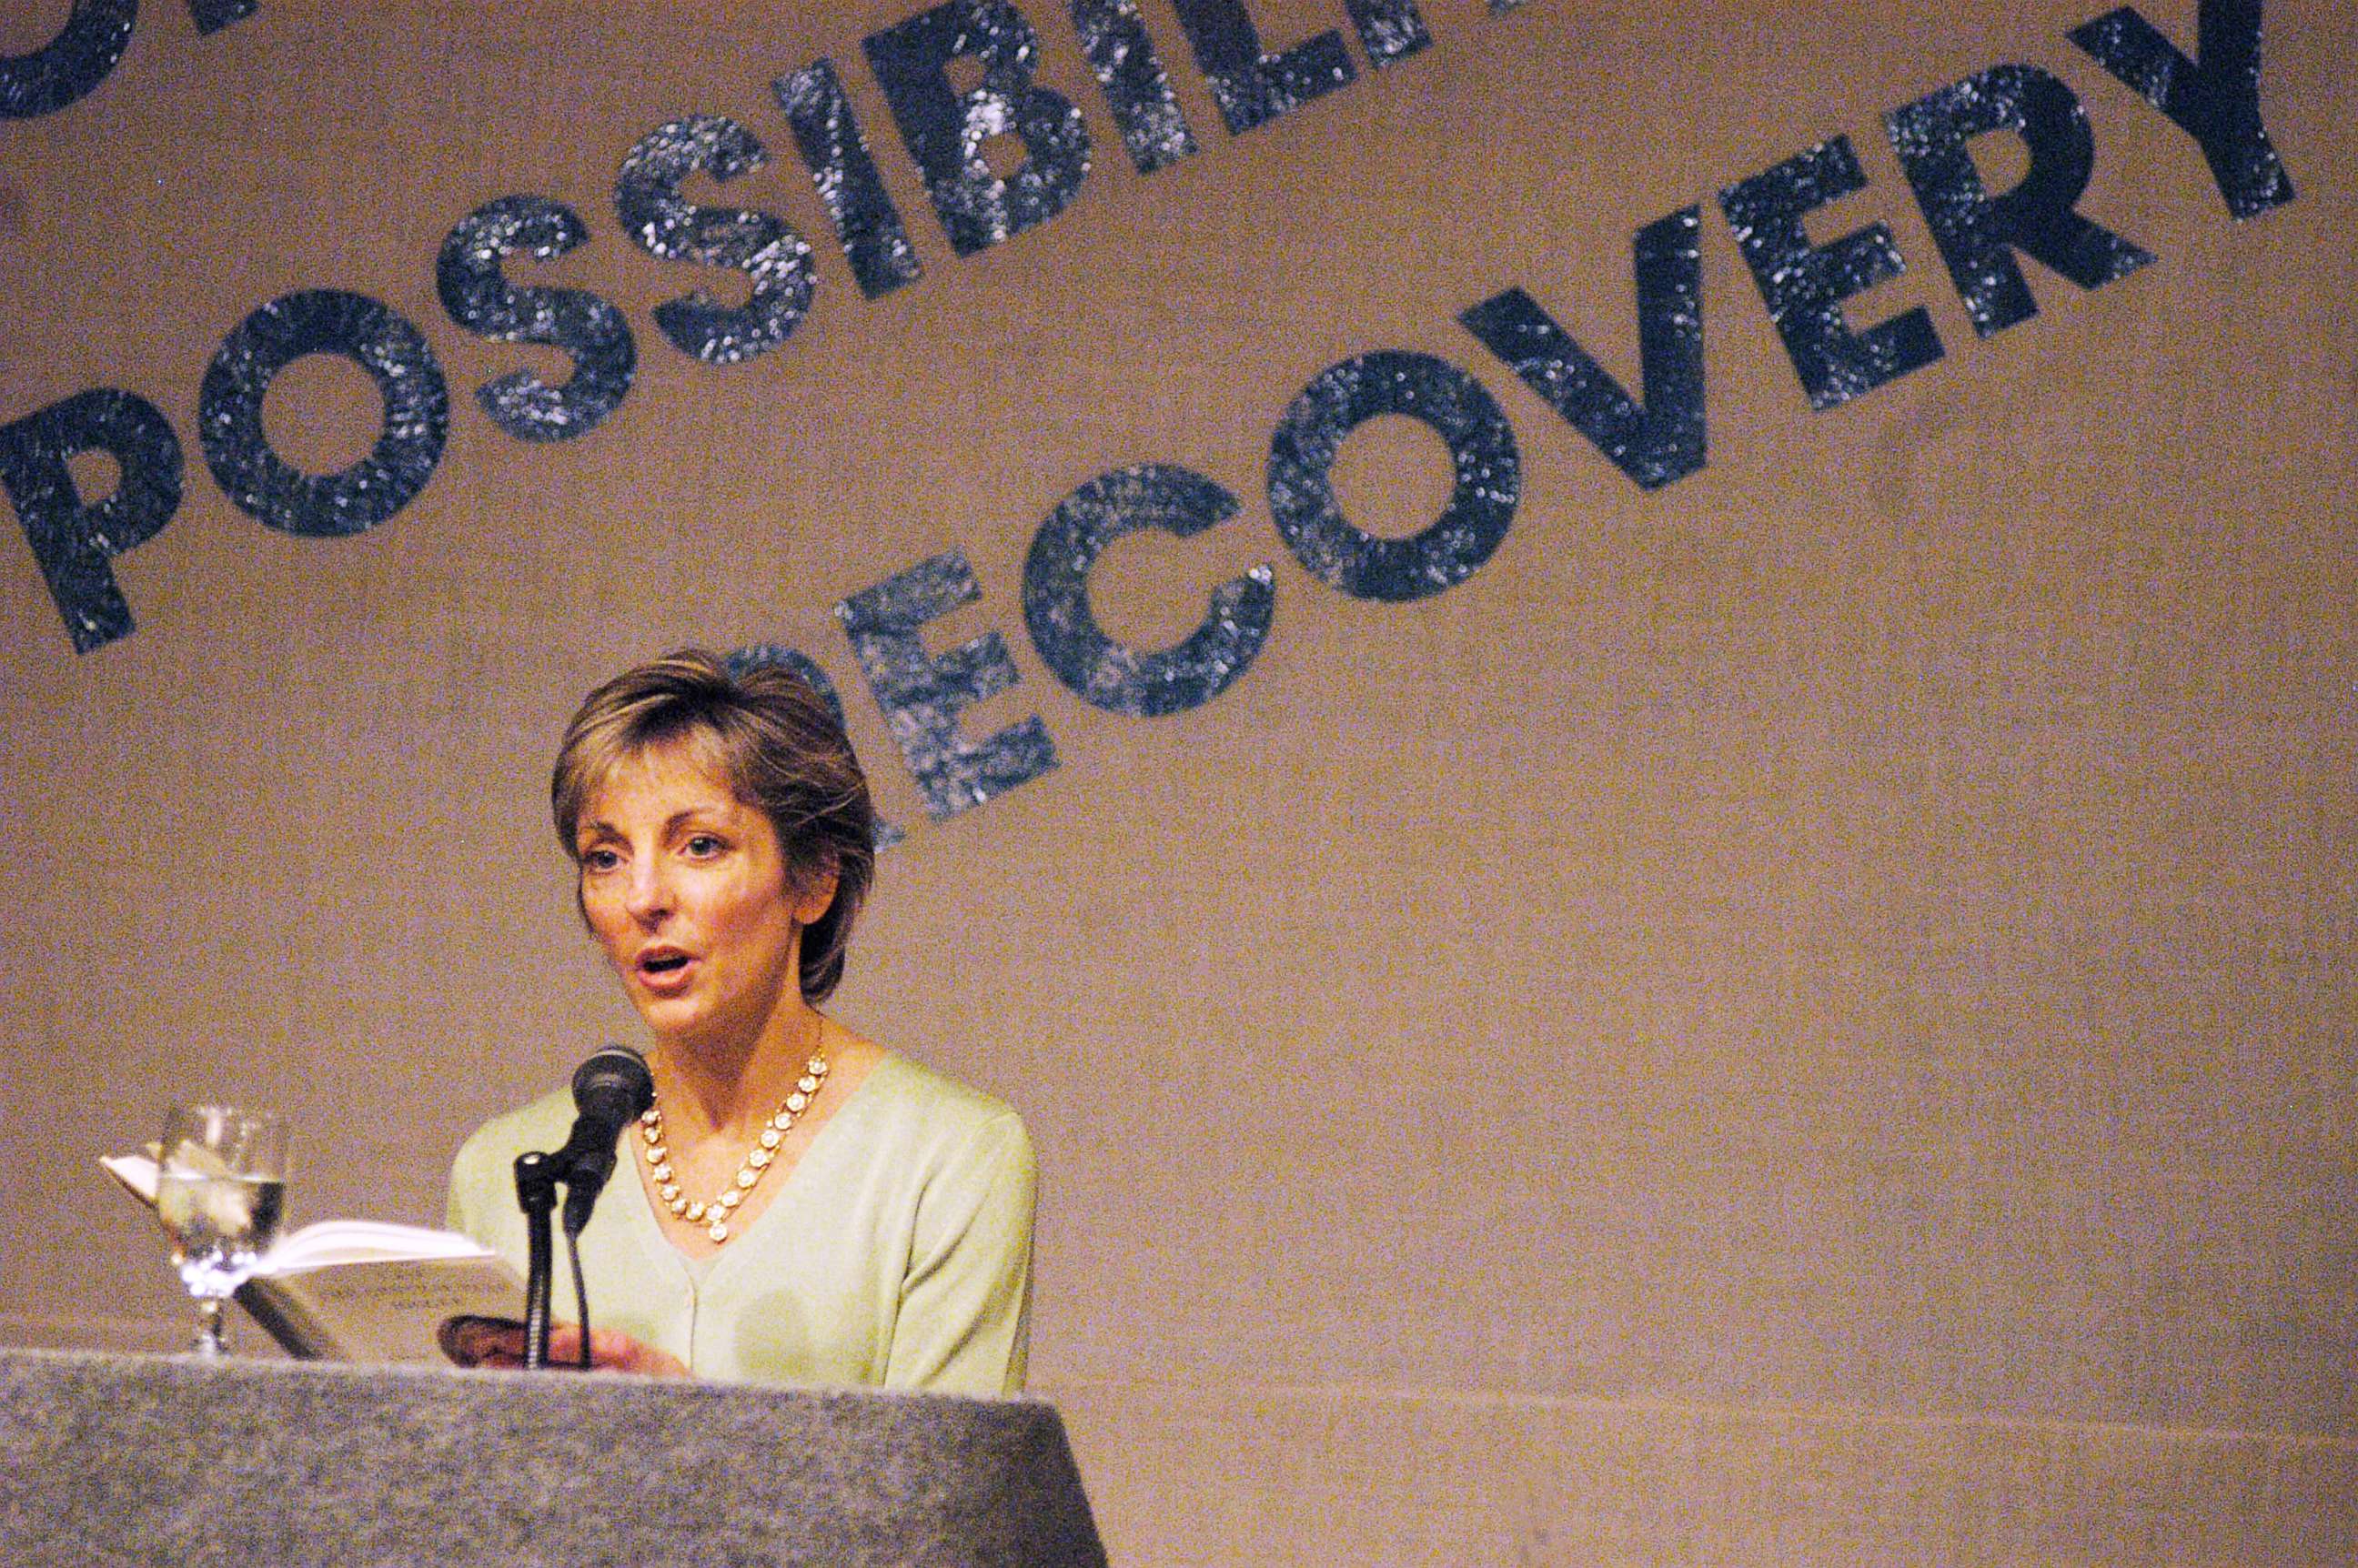 PHOTO: Trisha Meili speaks at the Sexual Assault Education Center's 2nd annual Author's Luncheon April 10, 2003 in Stamford, Conn.